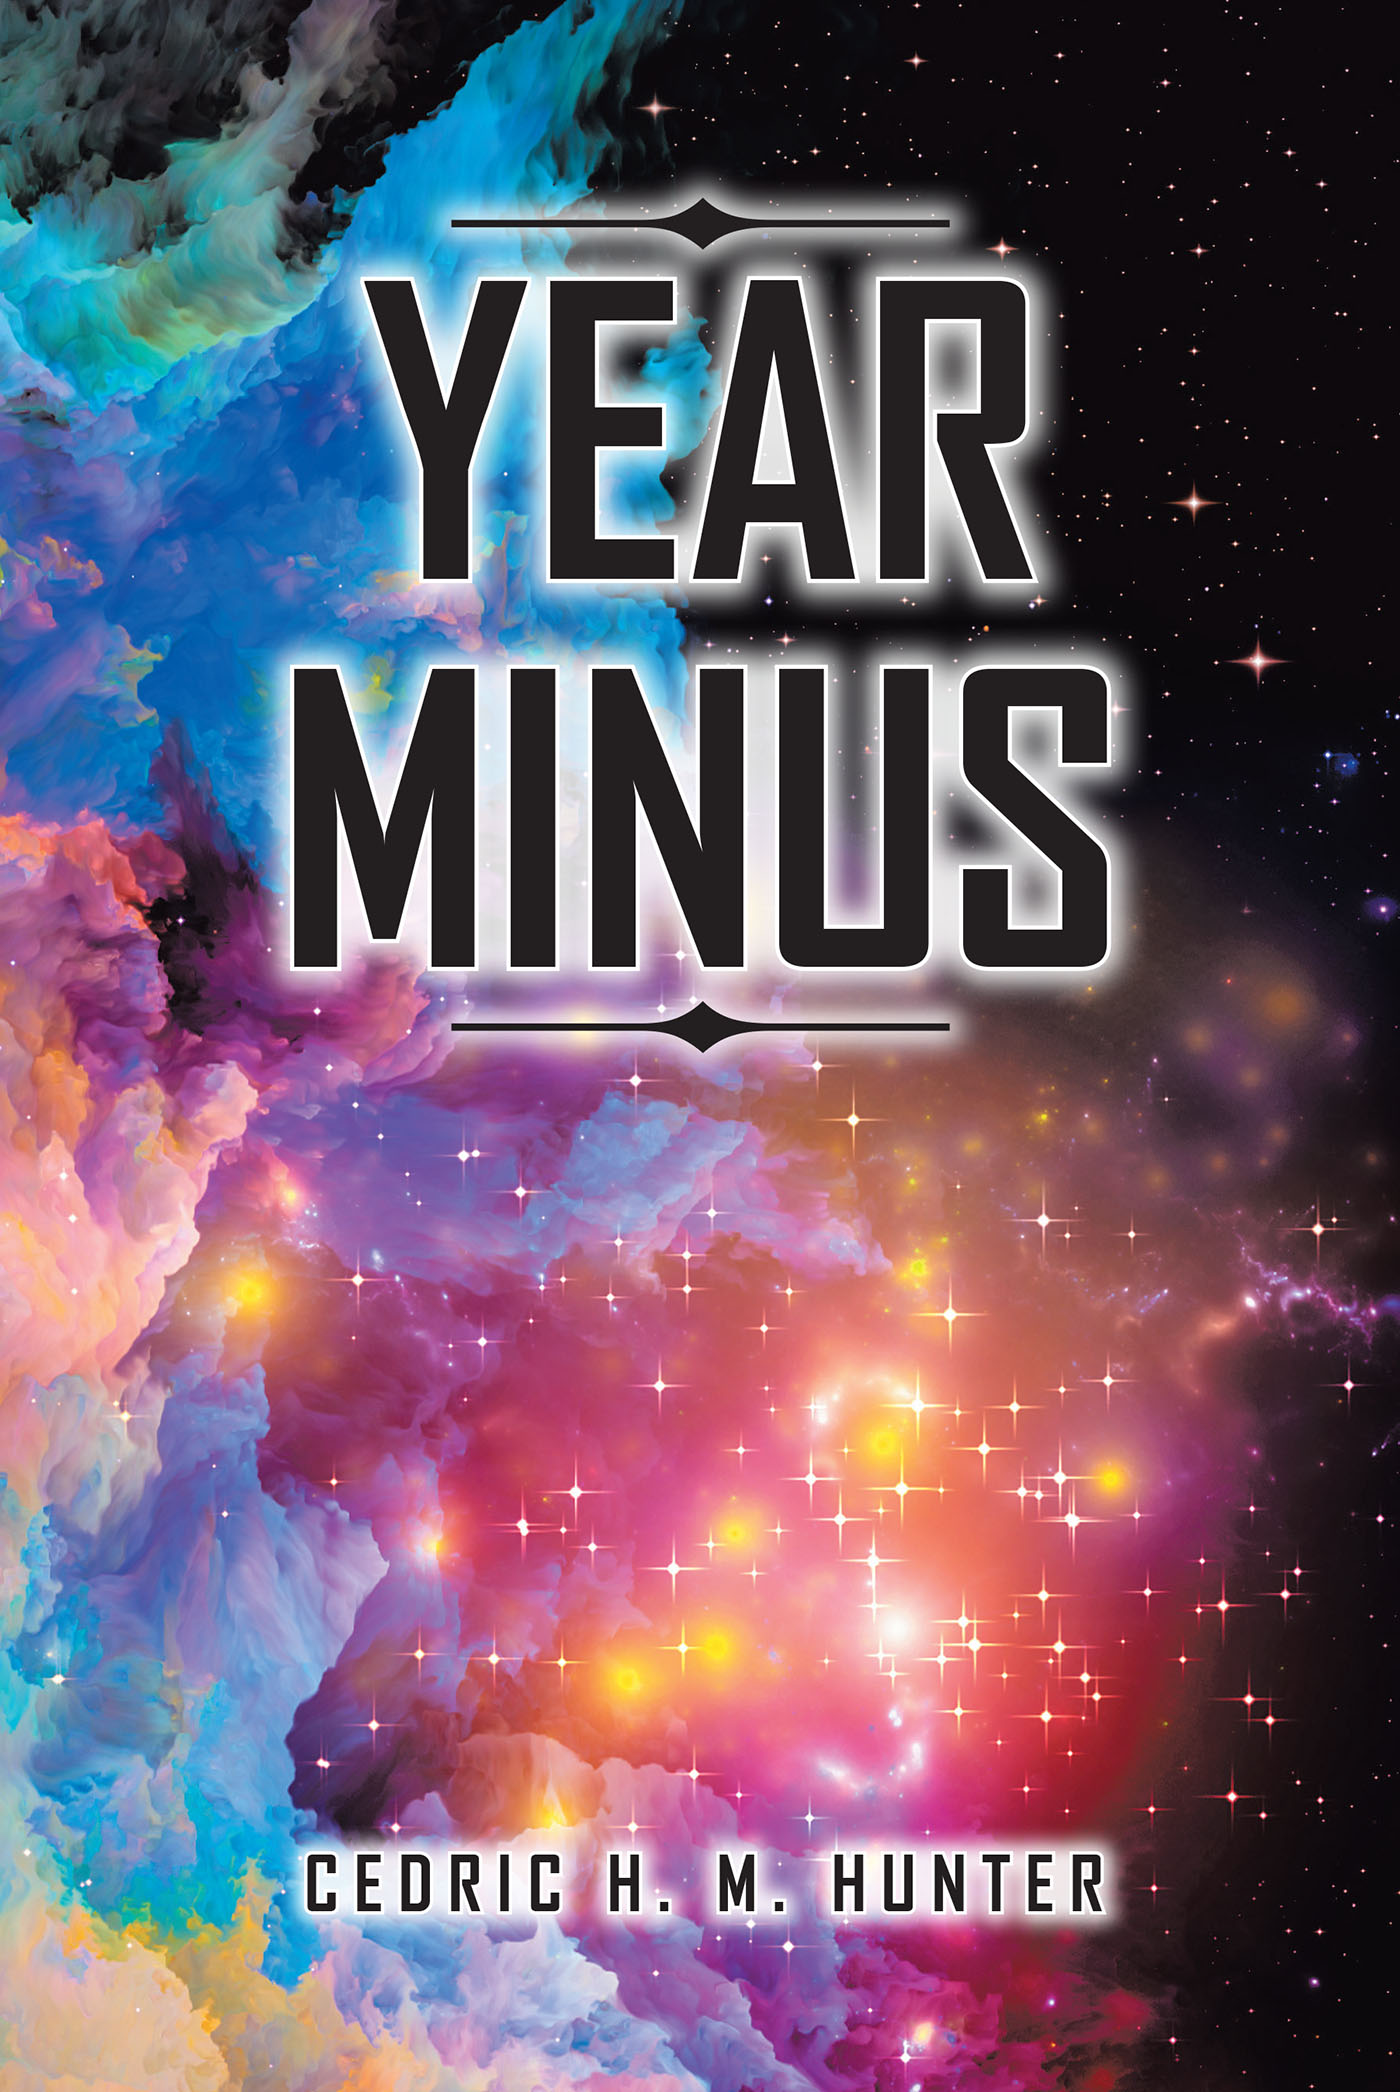 Cedric H. M. Hunter’s Newly Released "Year Minus" is a Captivating Journey of Unexpected Challenges Within a Spiritually Driven Fantasy